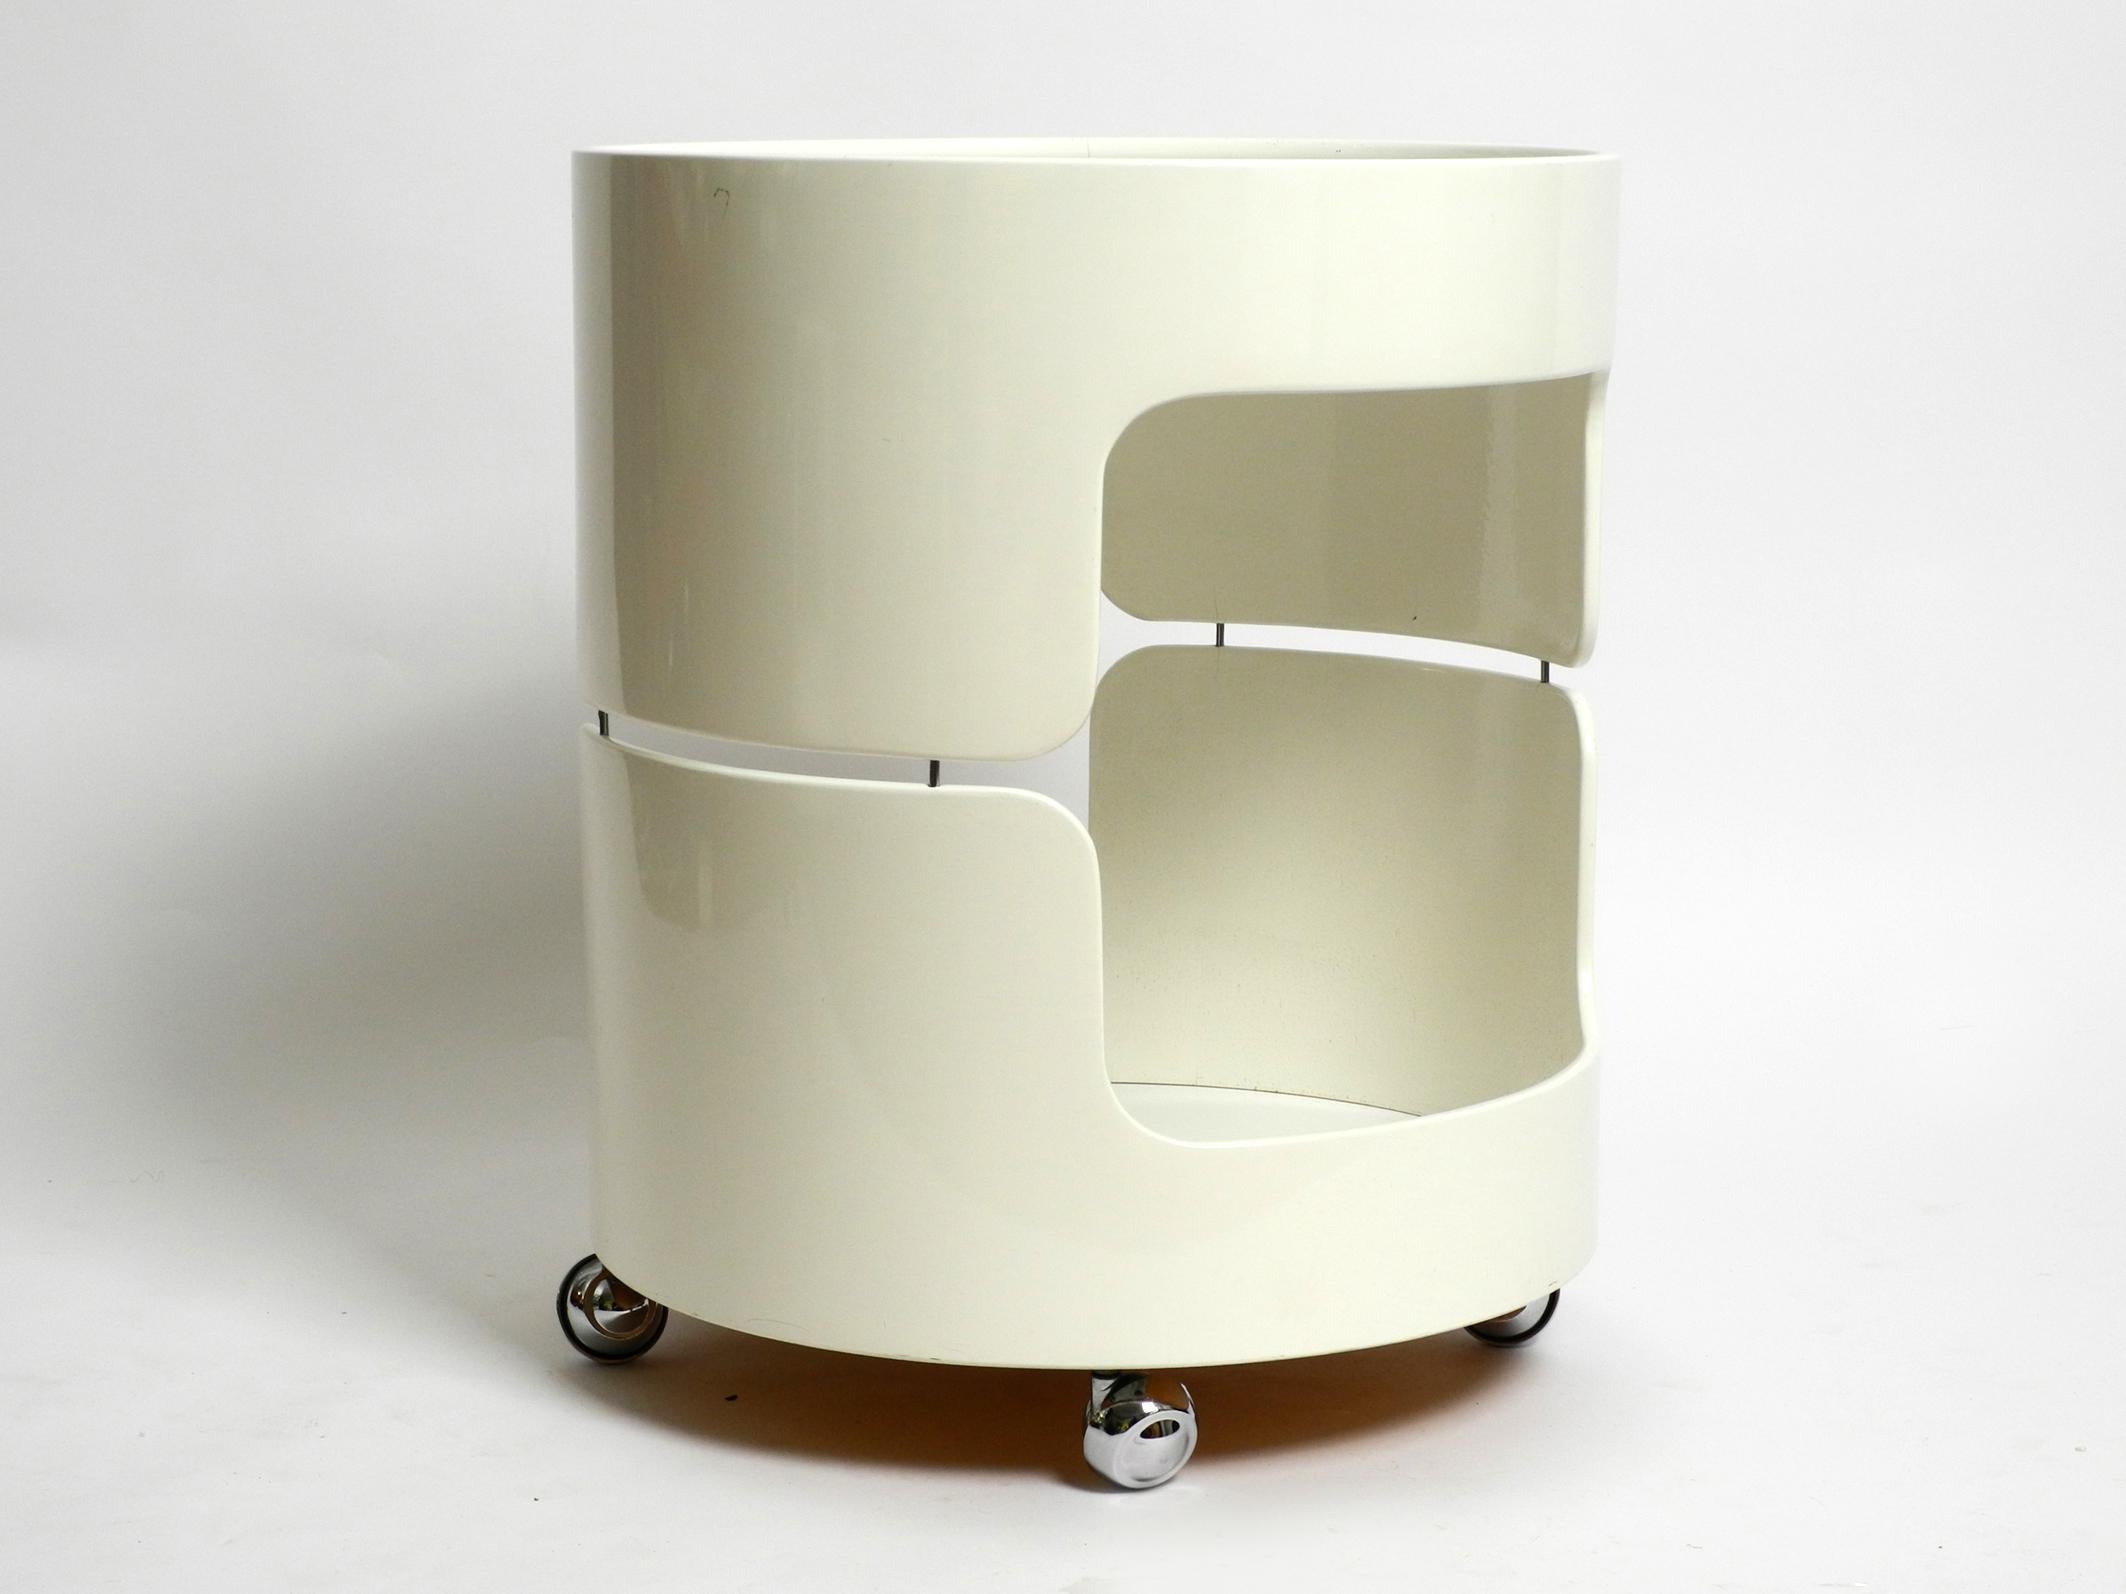 Beautiful, rare original 1960s white-beige side table by Opal made of plywood.
Fantastically beautiful Space Age design. With 4 wheels on the floor.
Very nice as a side table or bedside table or as a bar trolley.
Very good vintage condition with